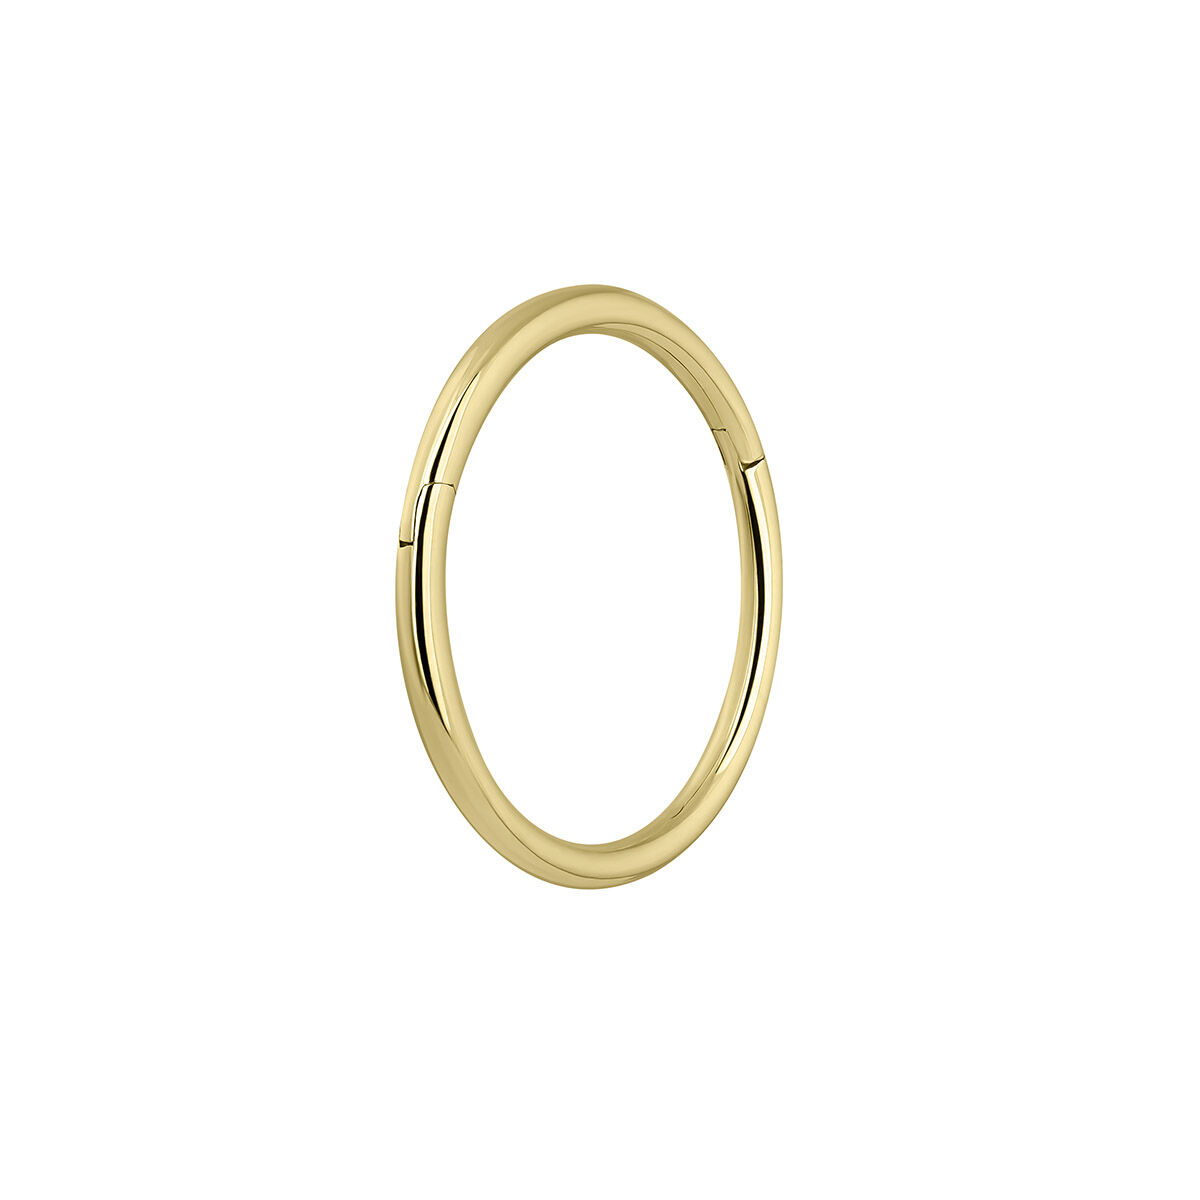 Single 9kt yellow gold small hoop earring, J05128-02-H, hi-res